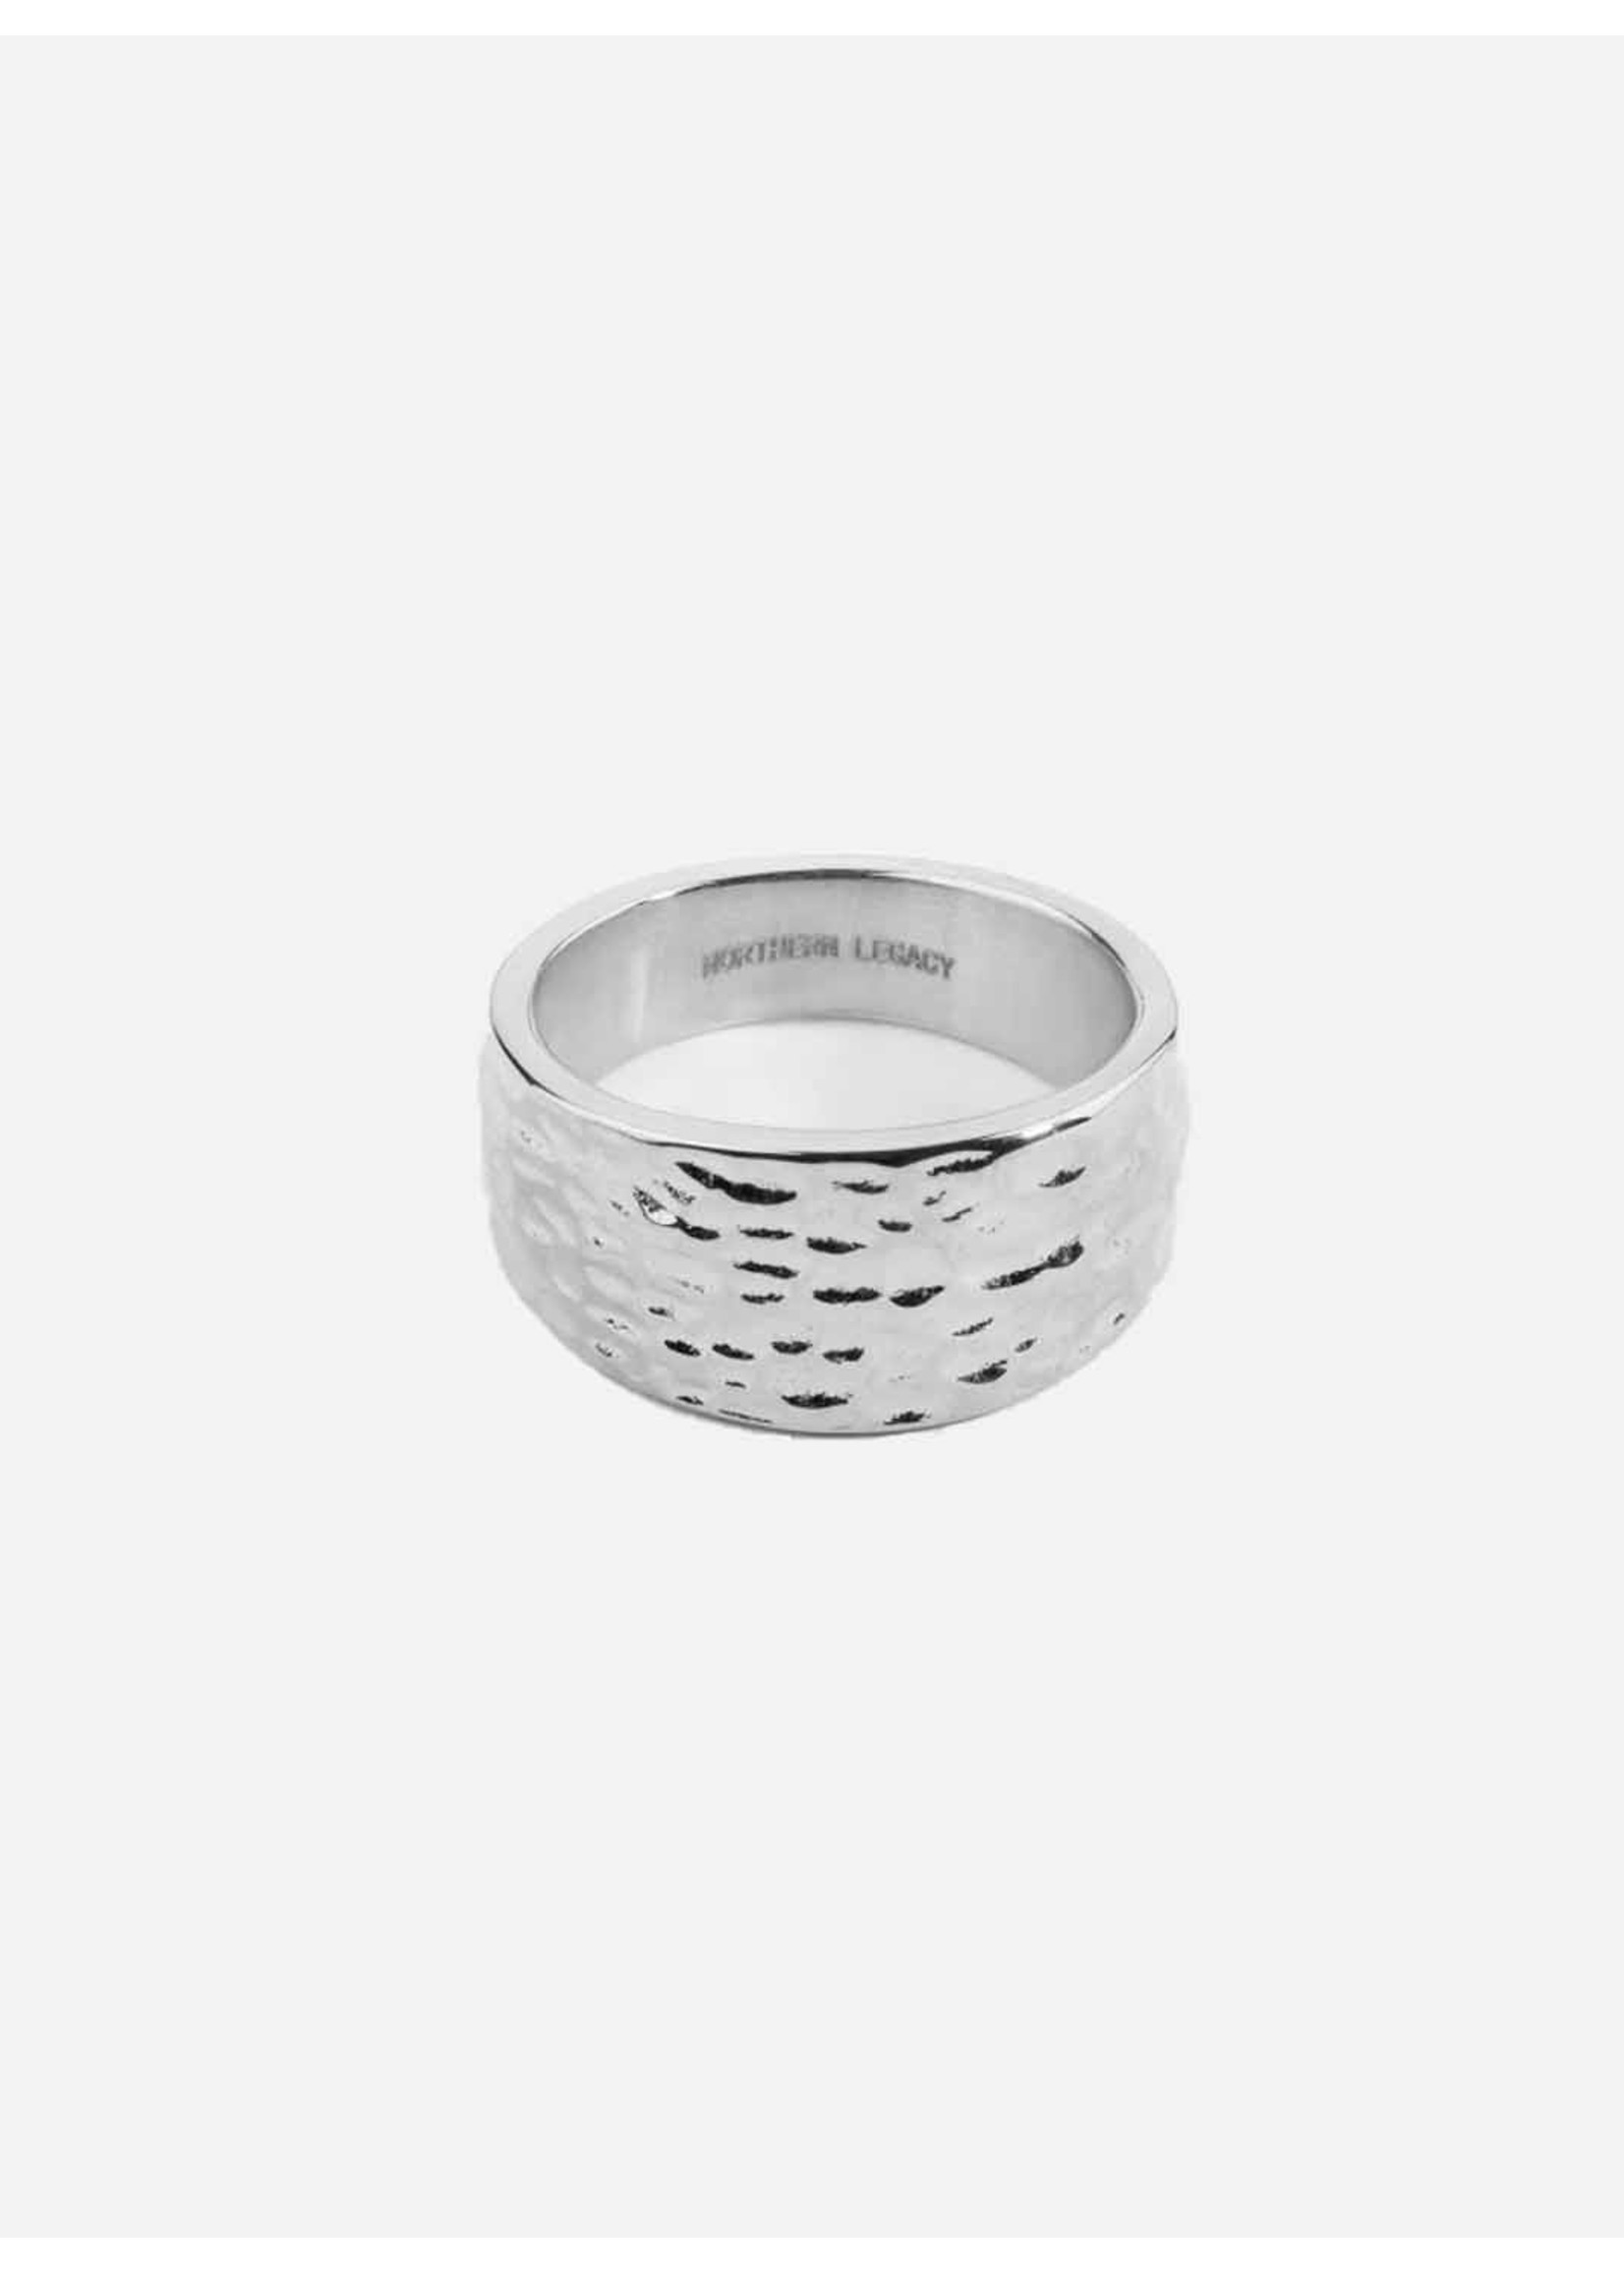 Northern Legacy Hammered Signature Ring Silver